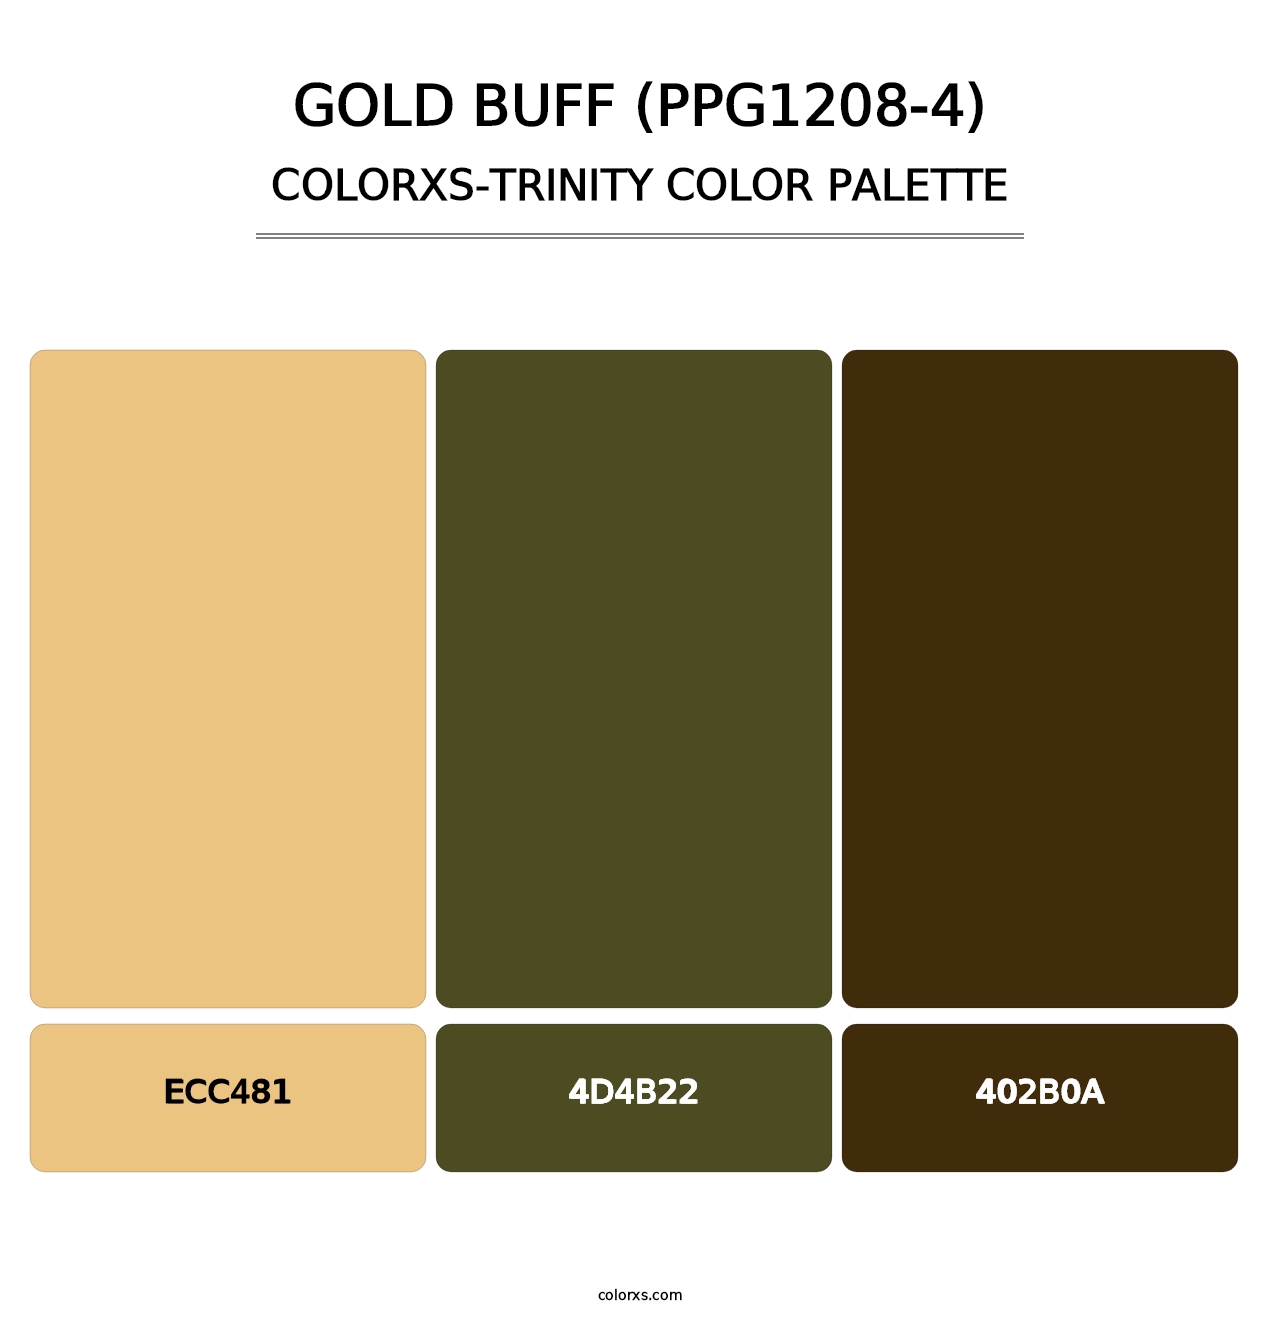 Gold Buff (PPG1208-4) - Colorxs Trinity Palette